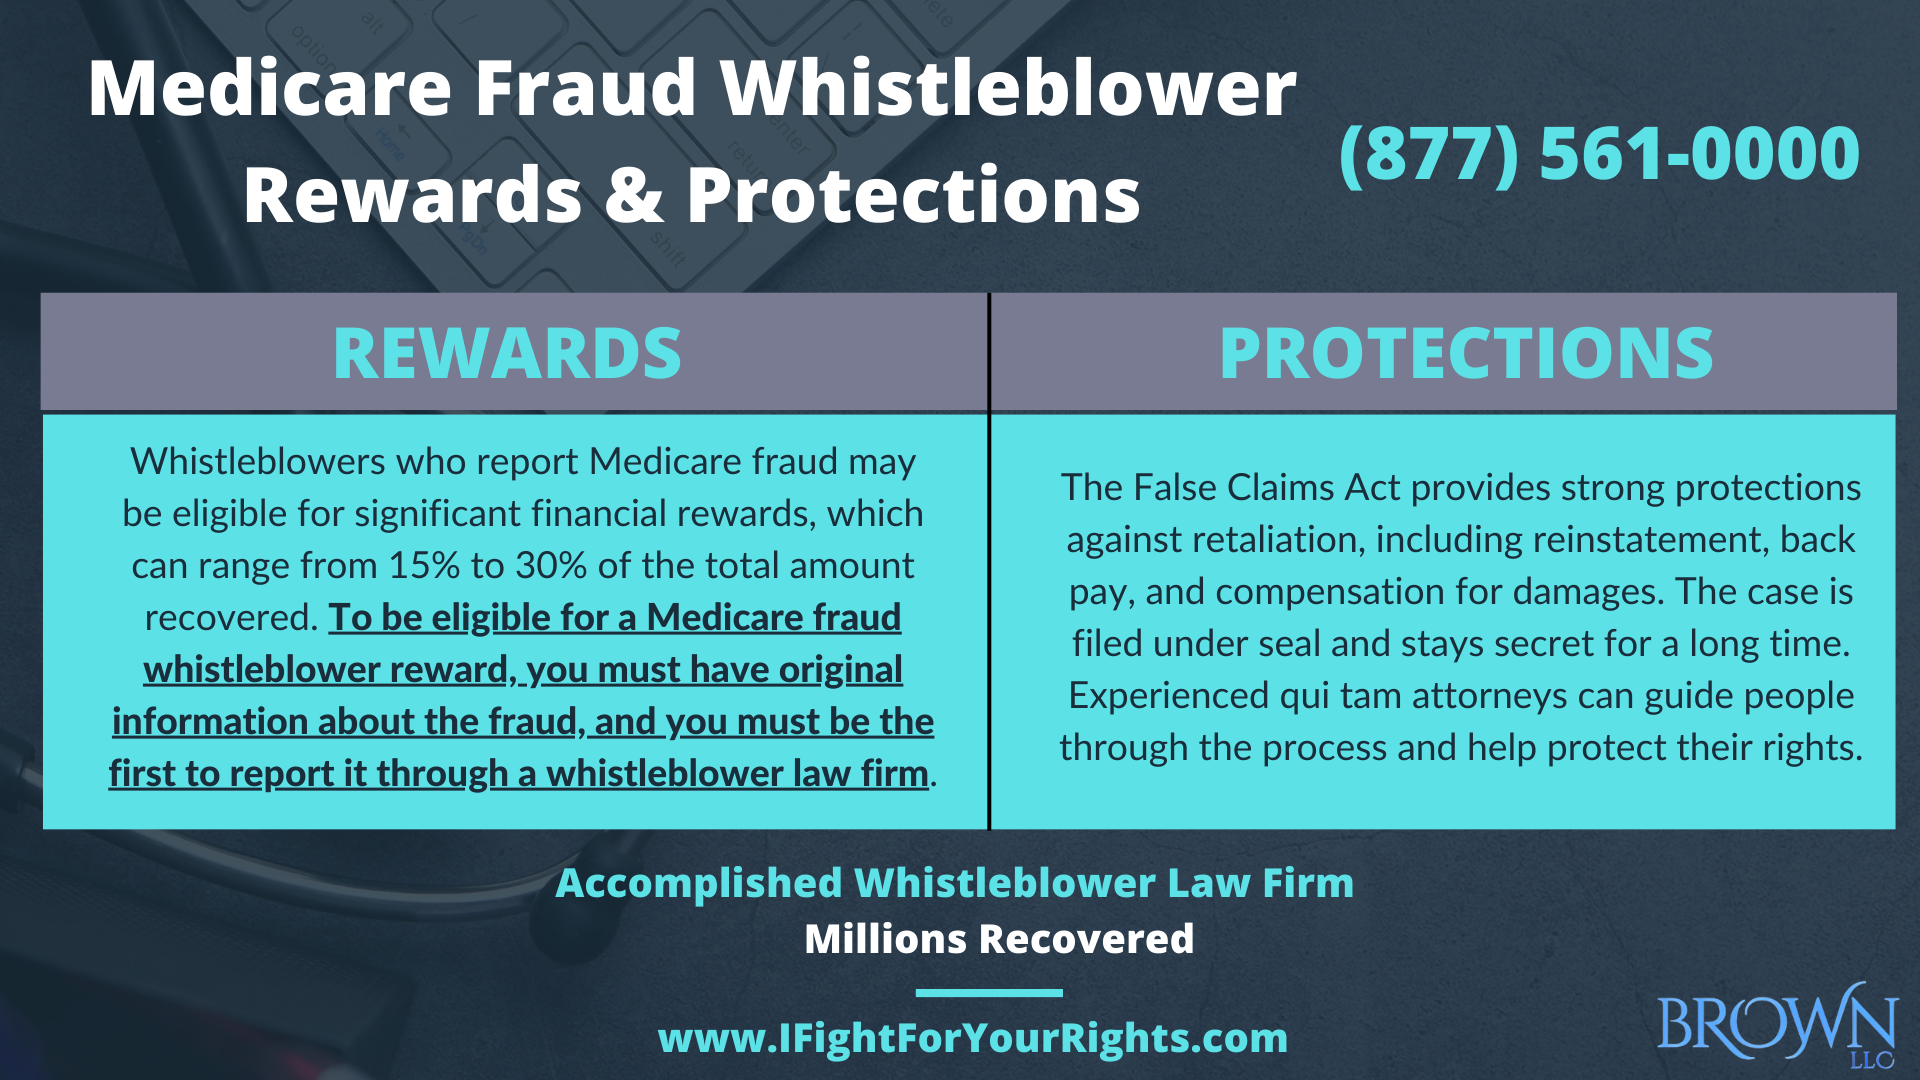 Medicare Fraud Whistleblower Rewards and Protections